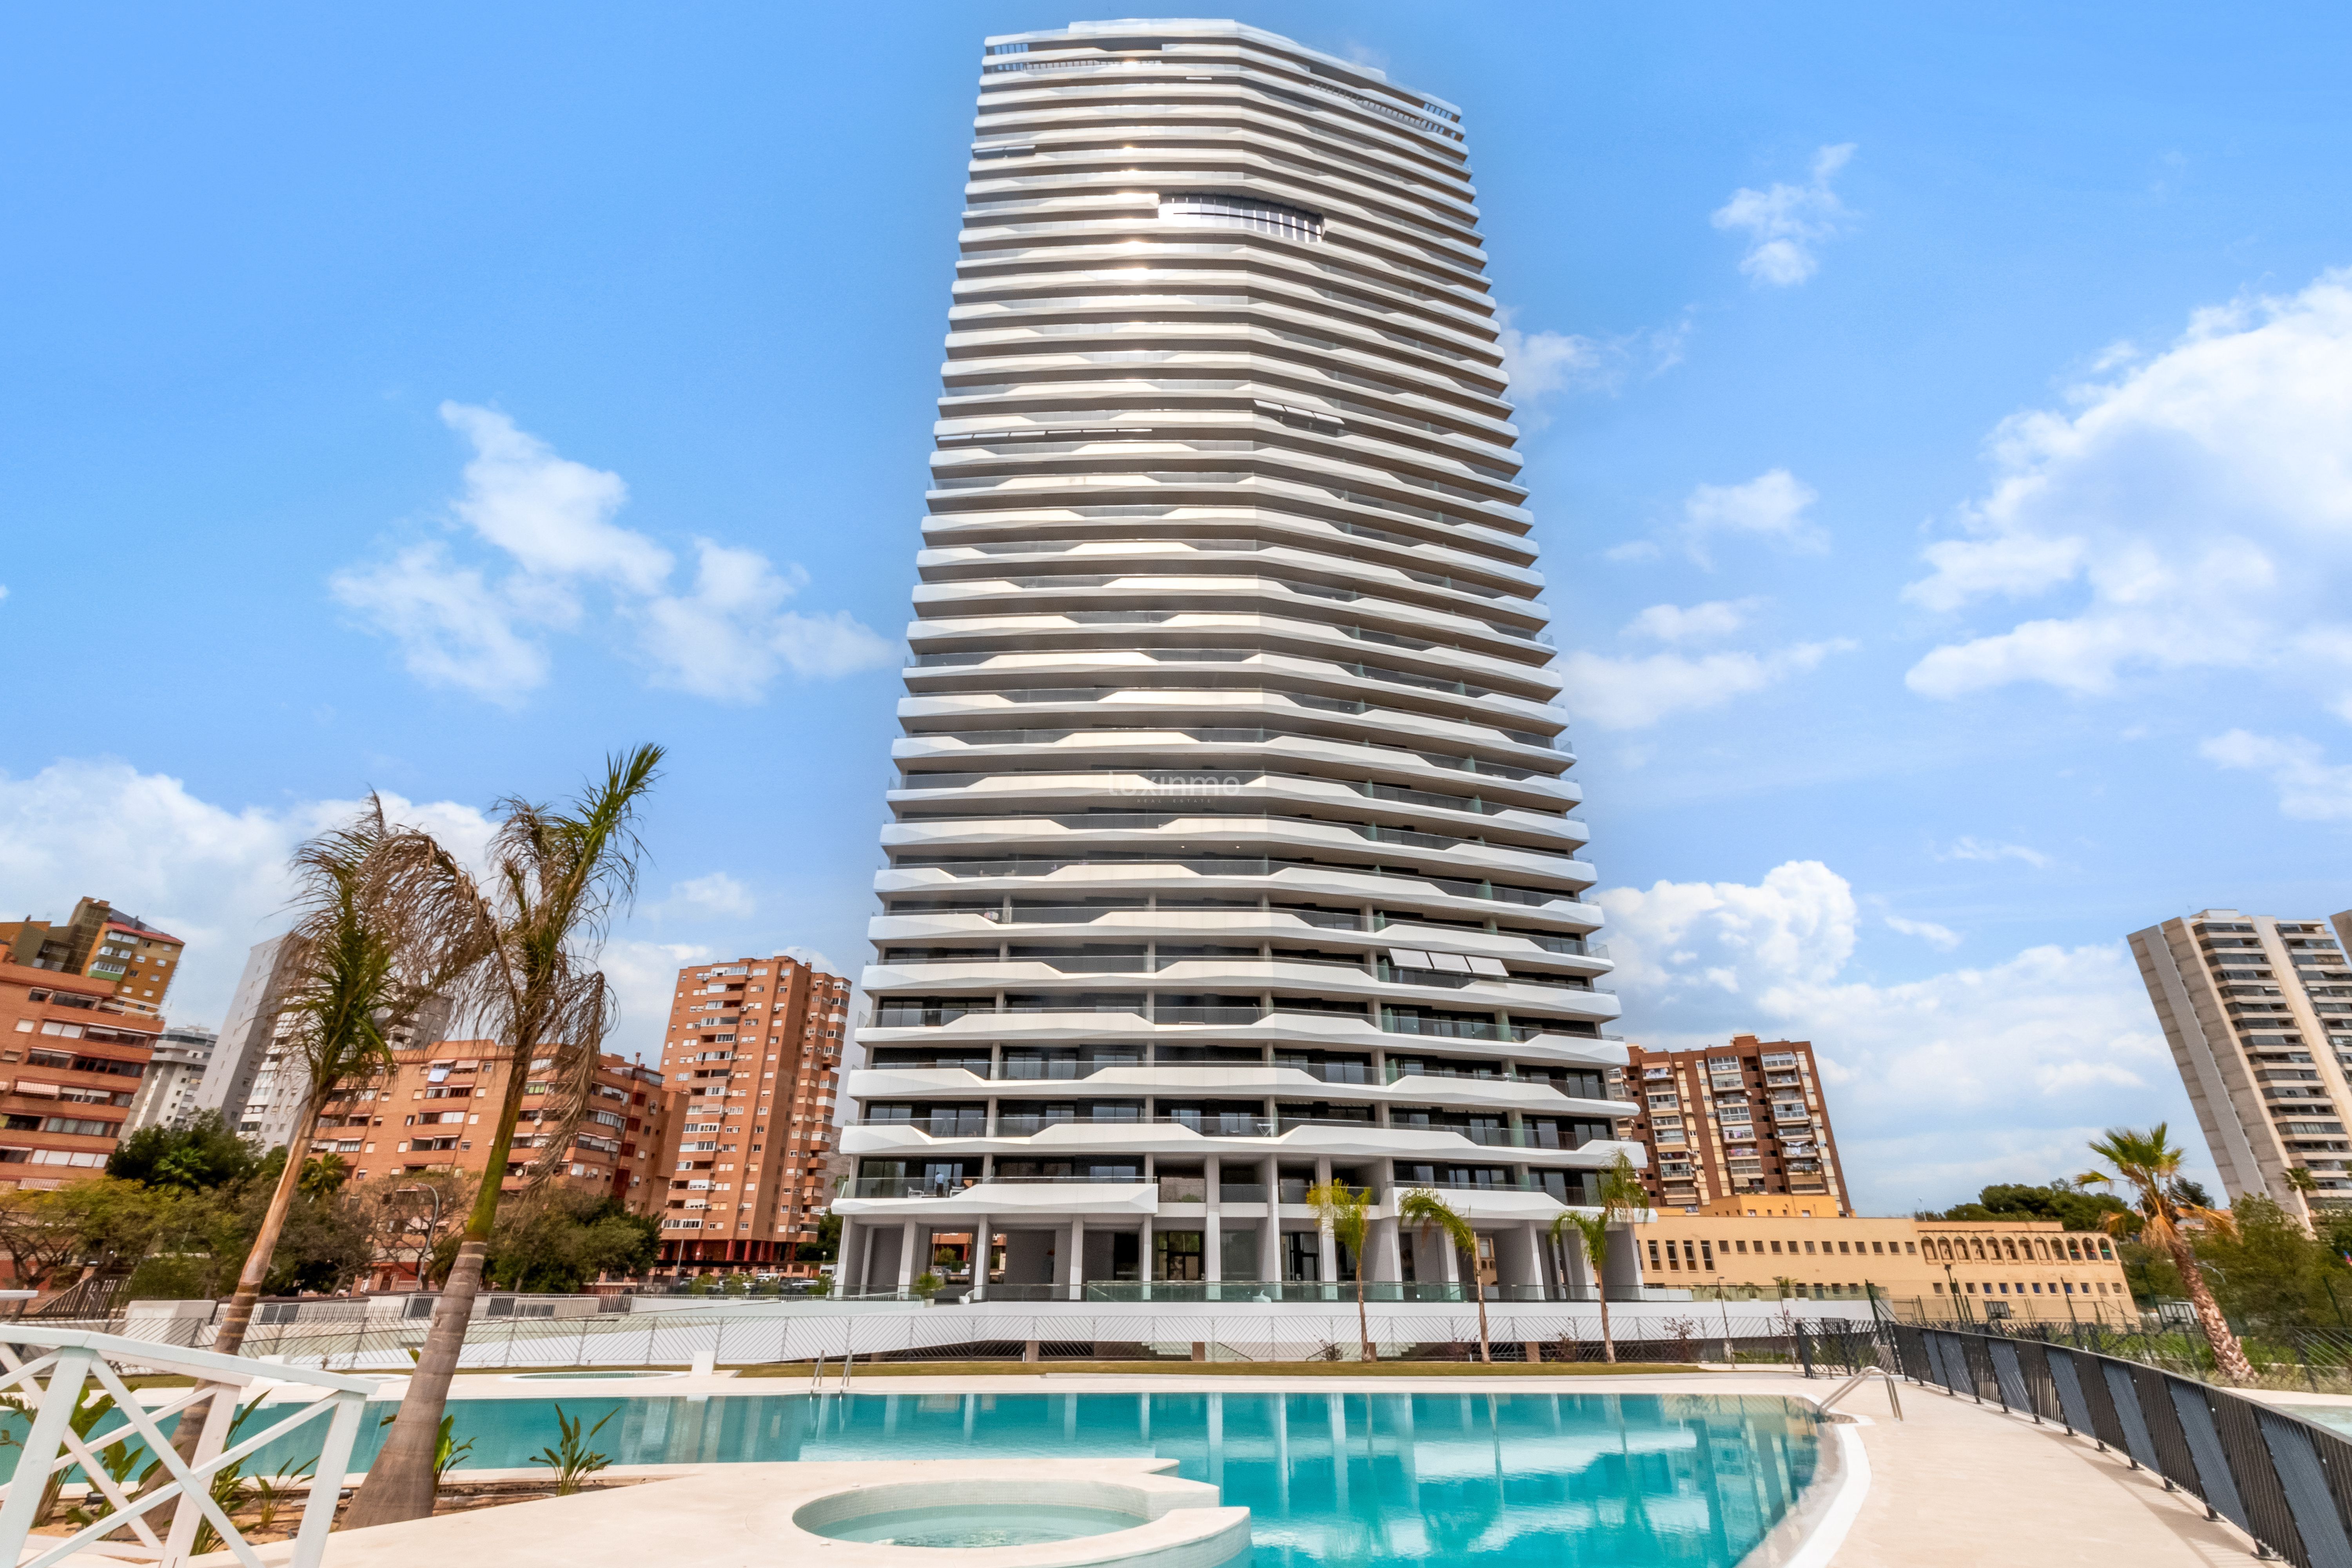 Apartment for sale in Benidorm 28